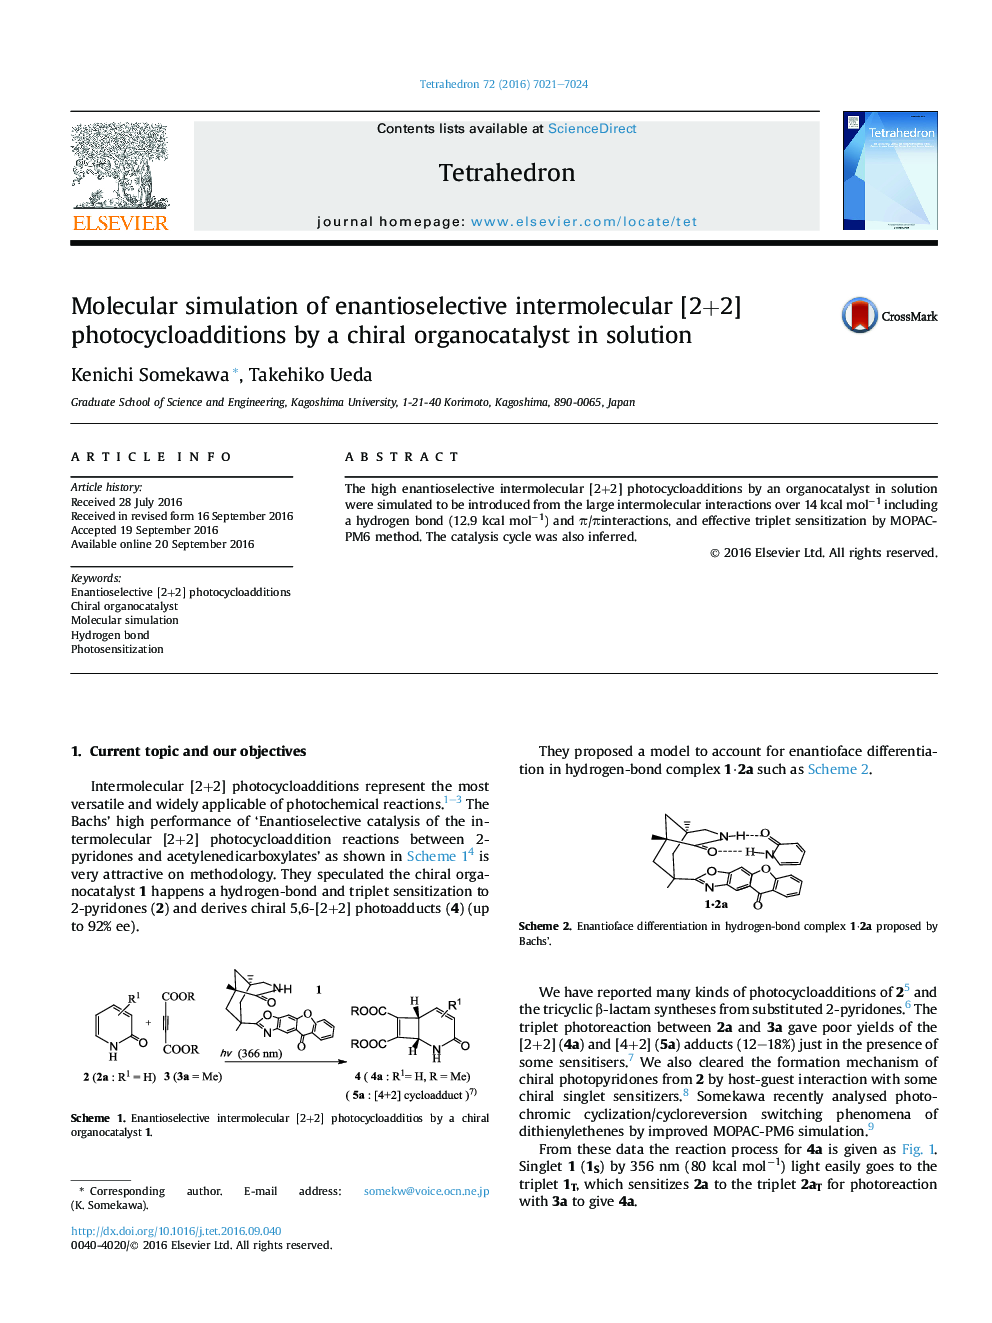 Molecular simulation of enantioselective intermolecular [2+2] photocycloadditions by a chiral organocatalyst in solution